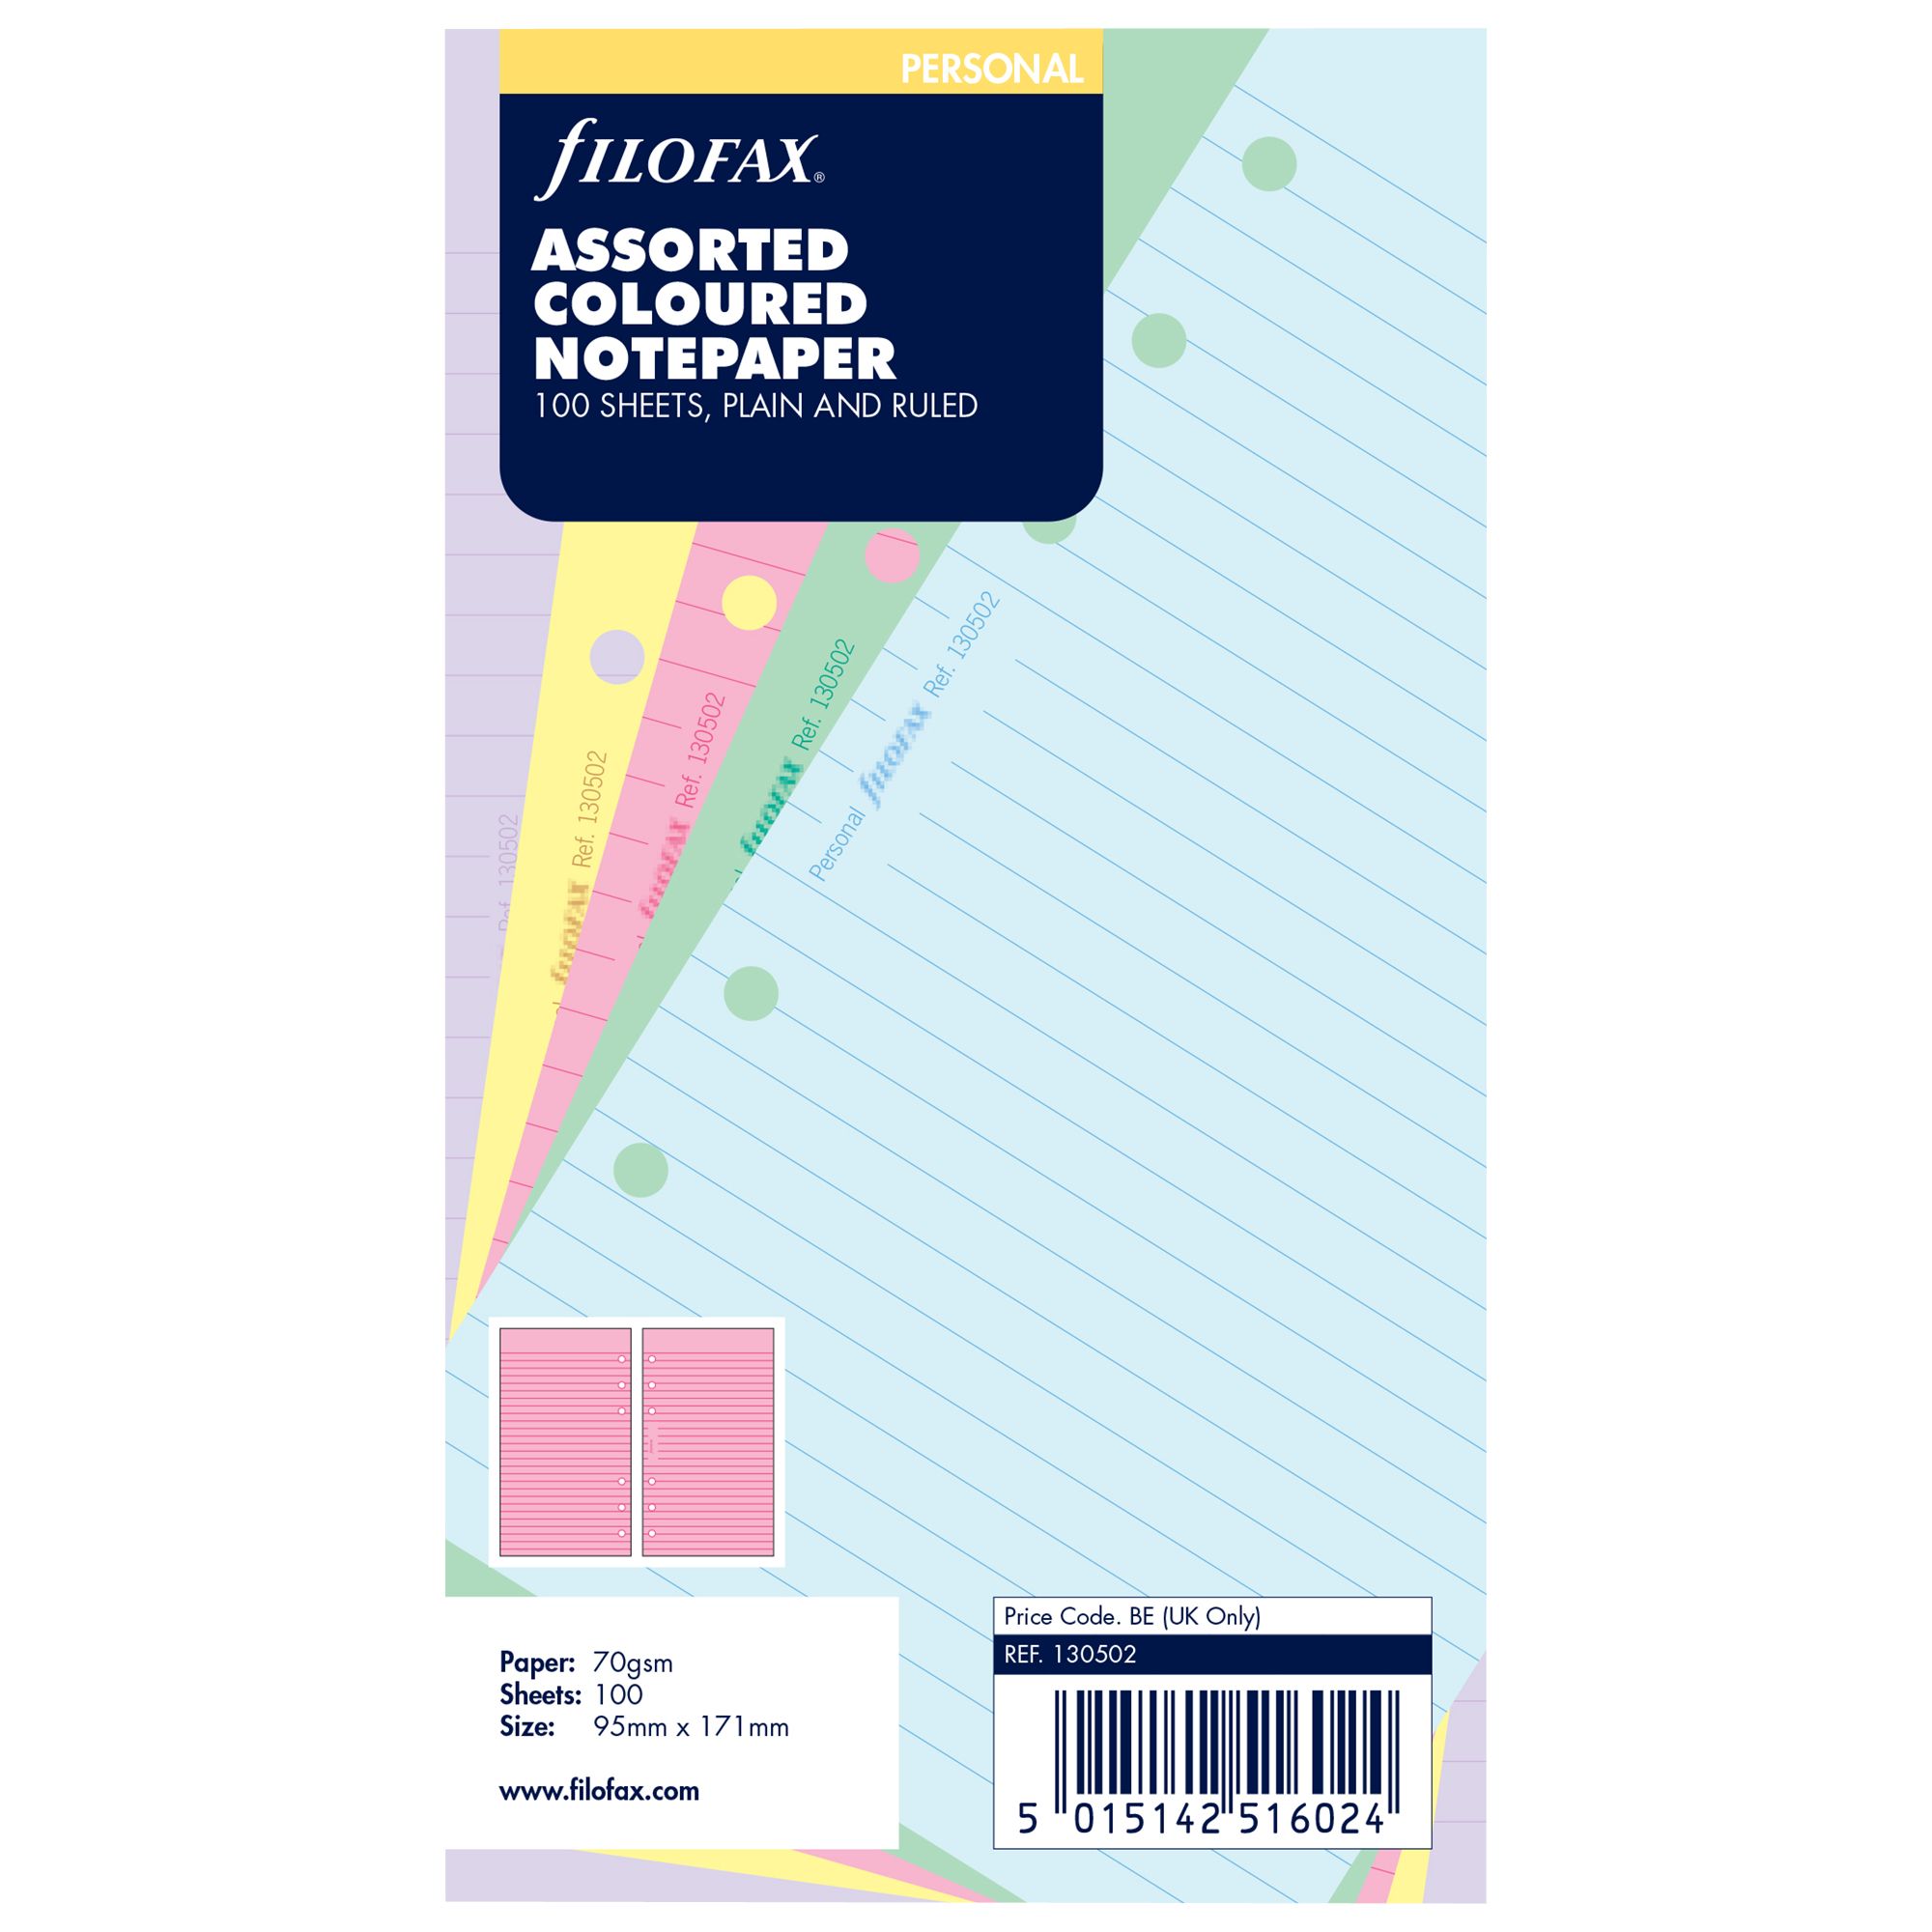 Filofax Personal Assorted Paper Value Pack, Coloured